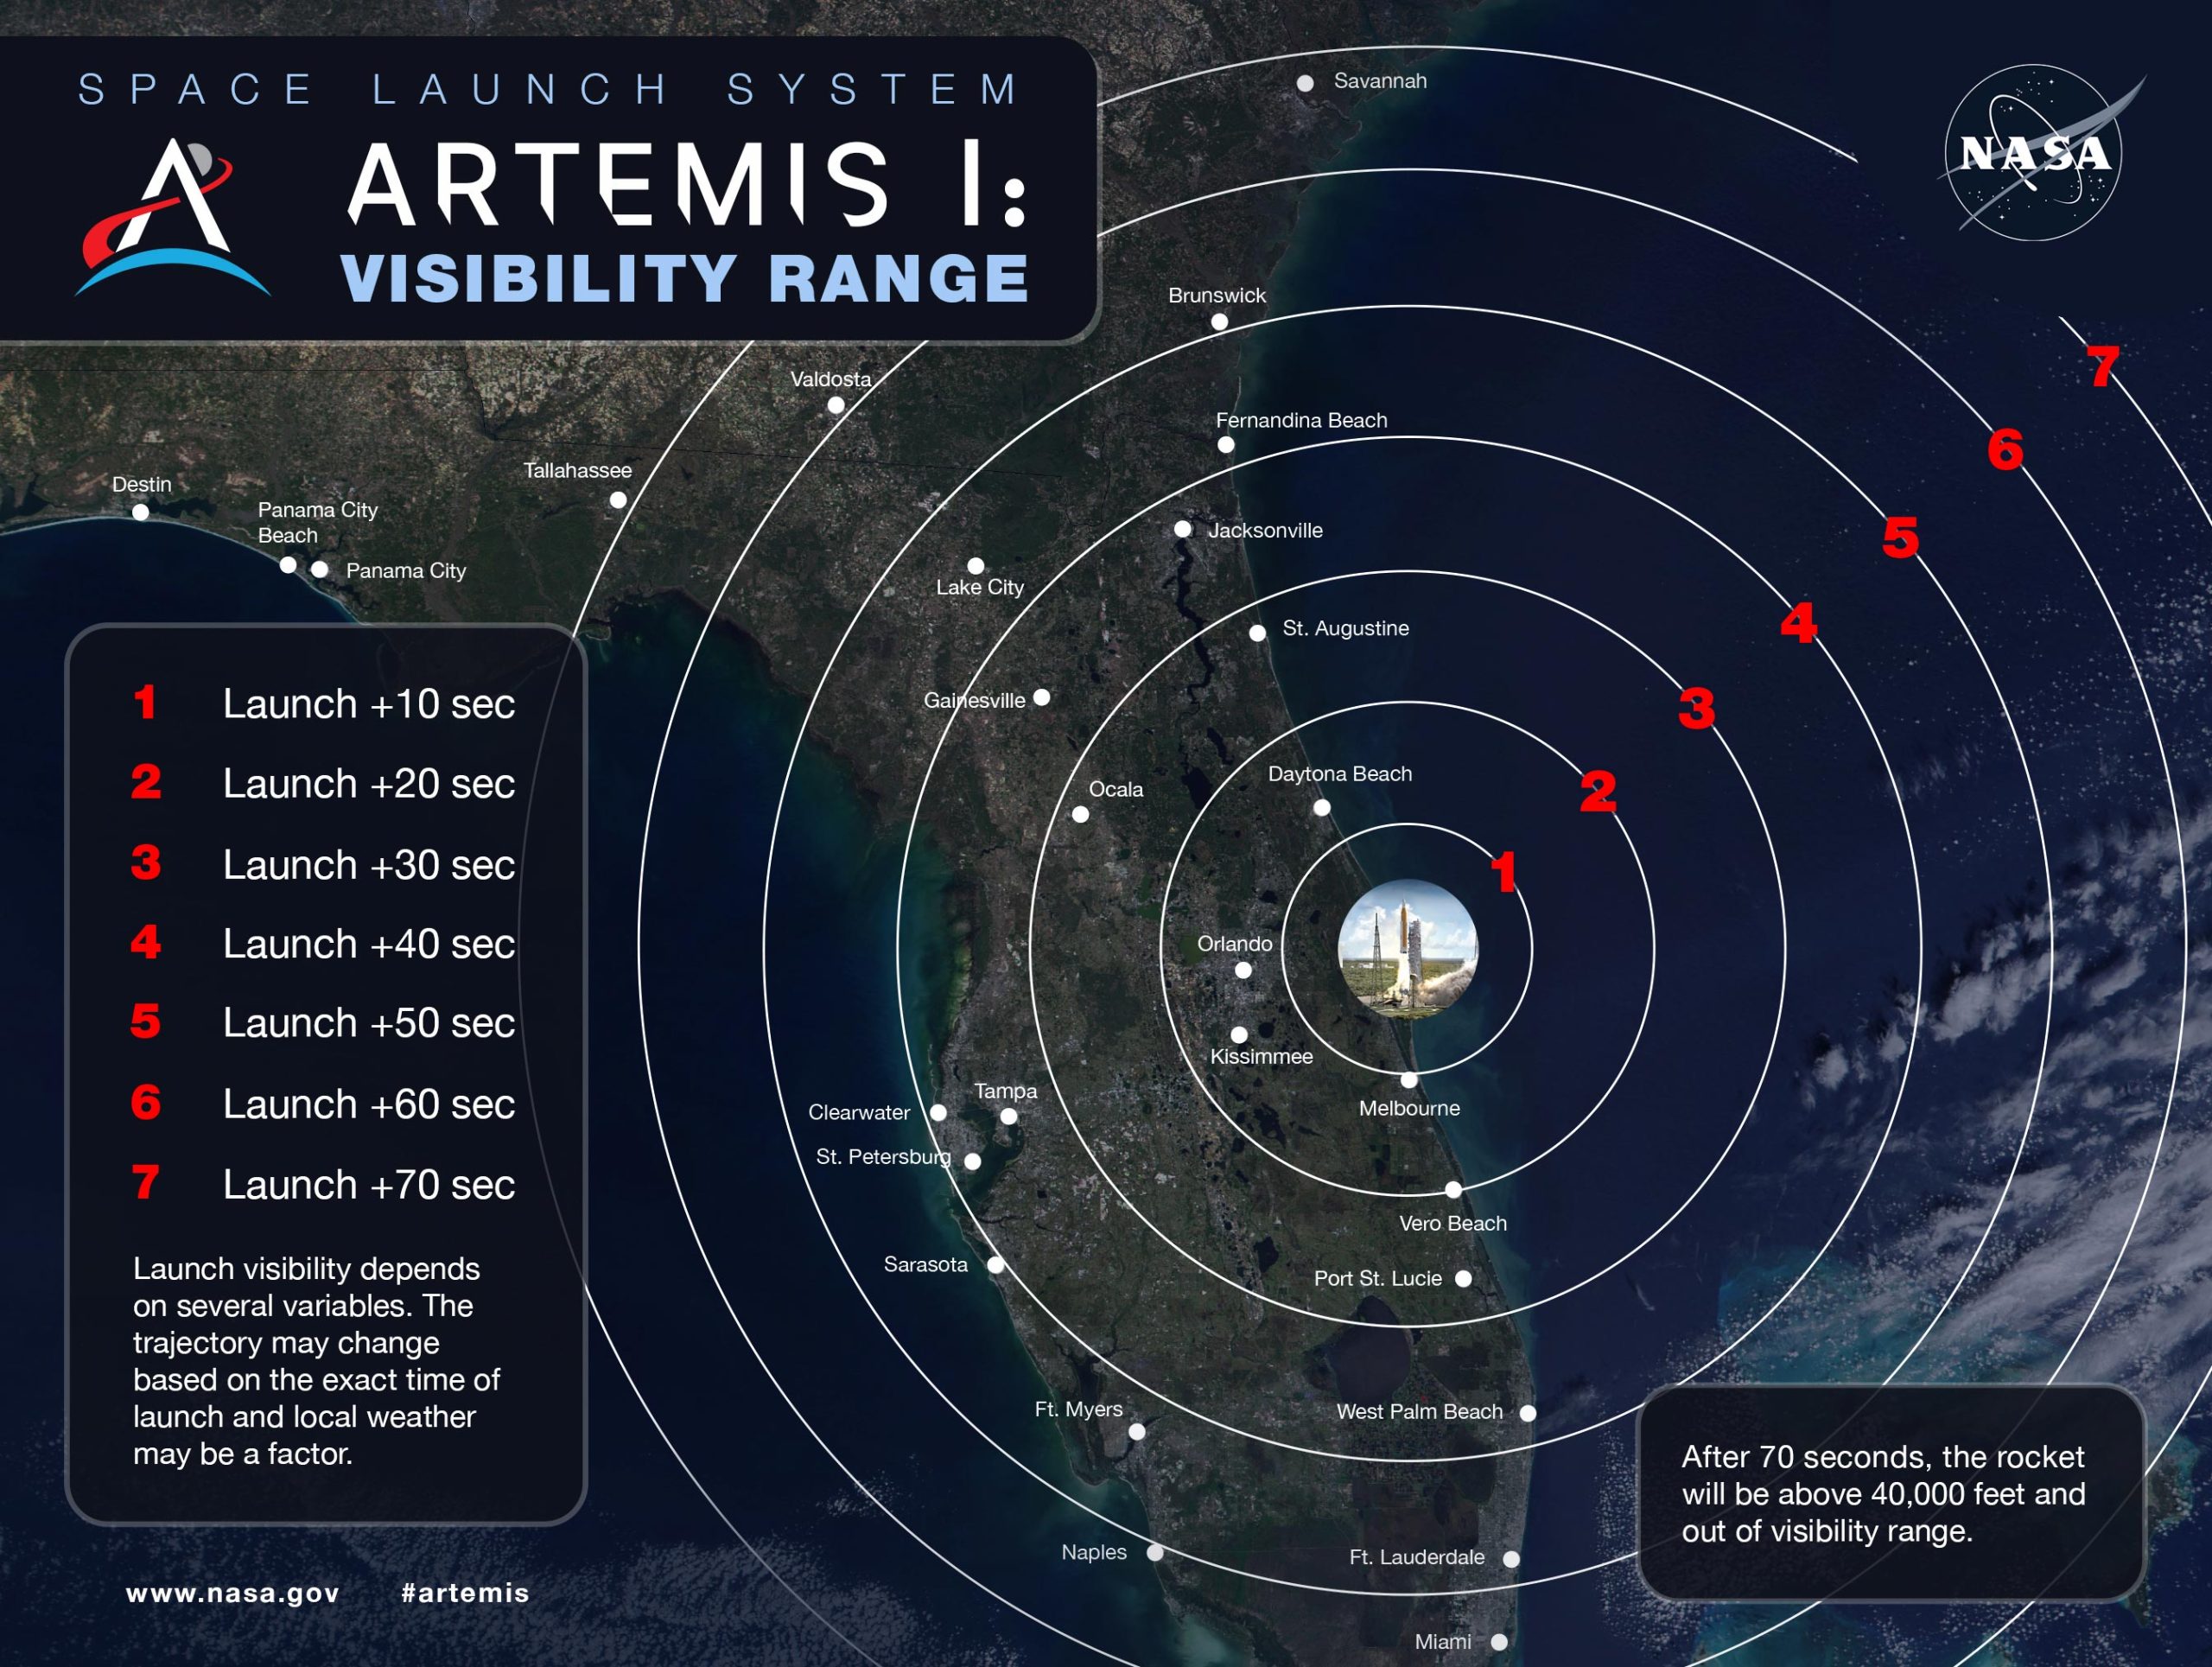 artemis 1 travel time to moon